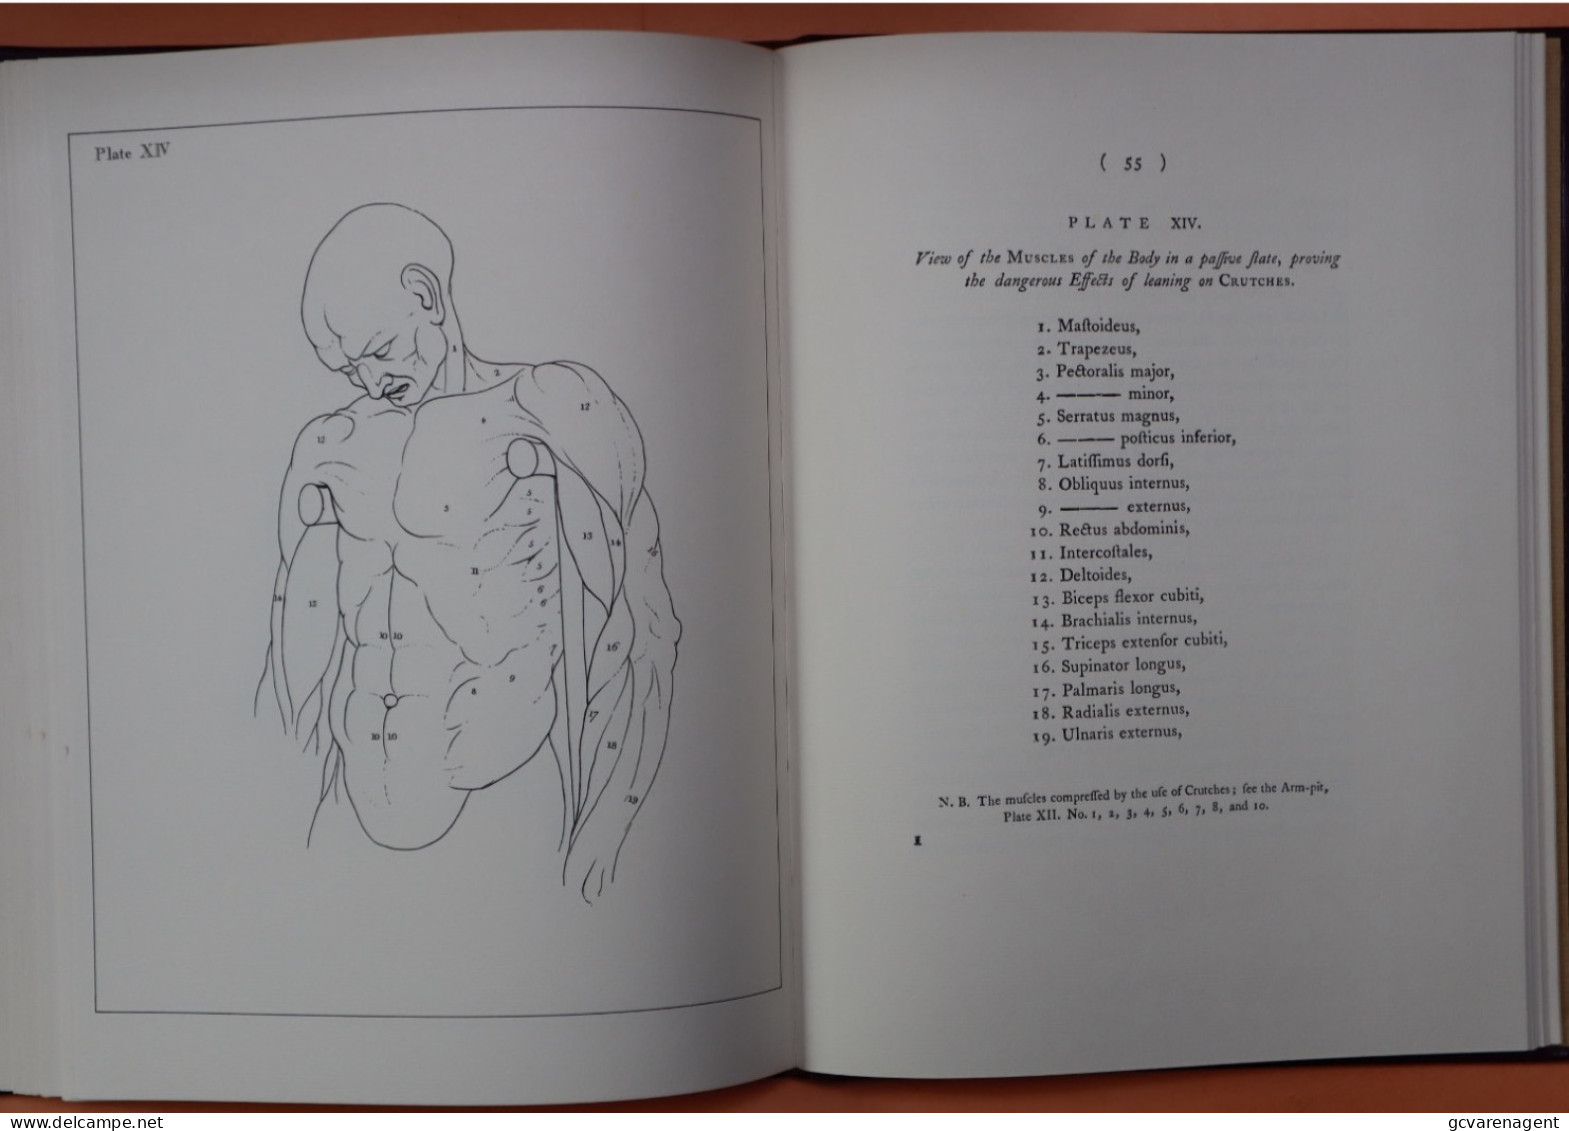 !!! COPY - ANTREATISE ON THE SCIENCE OF MAUSCULAR ACTION  BY JOHN PUGH ANATOMIST  LONDON - SEE DESCRIPTION AND IMAGES